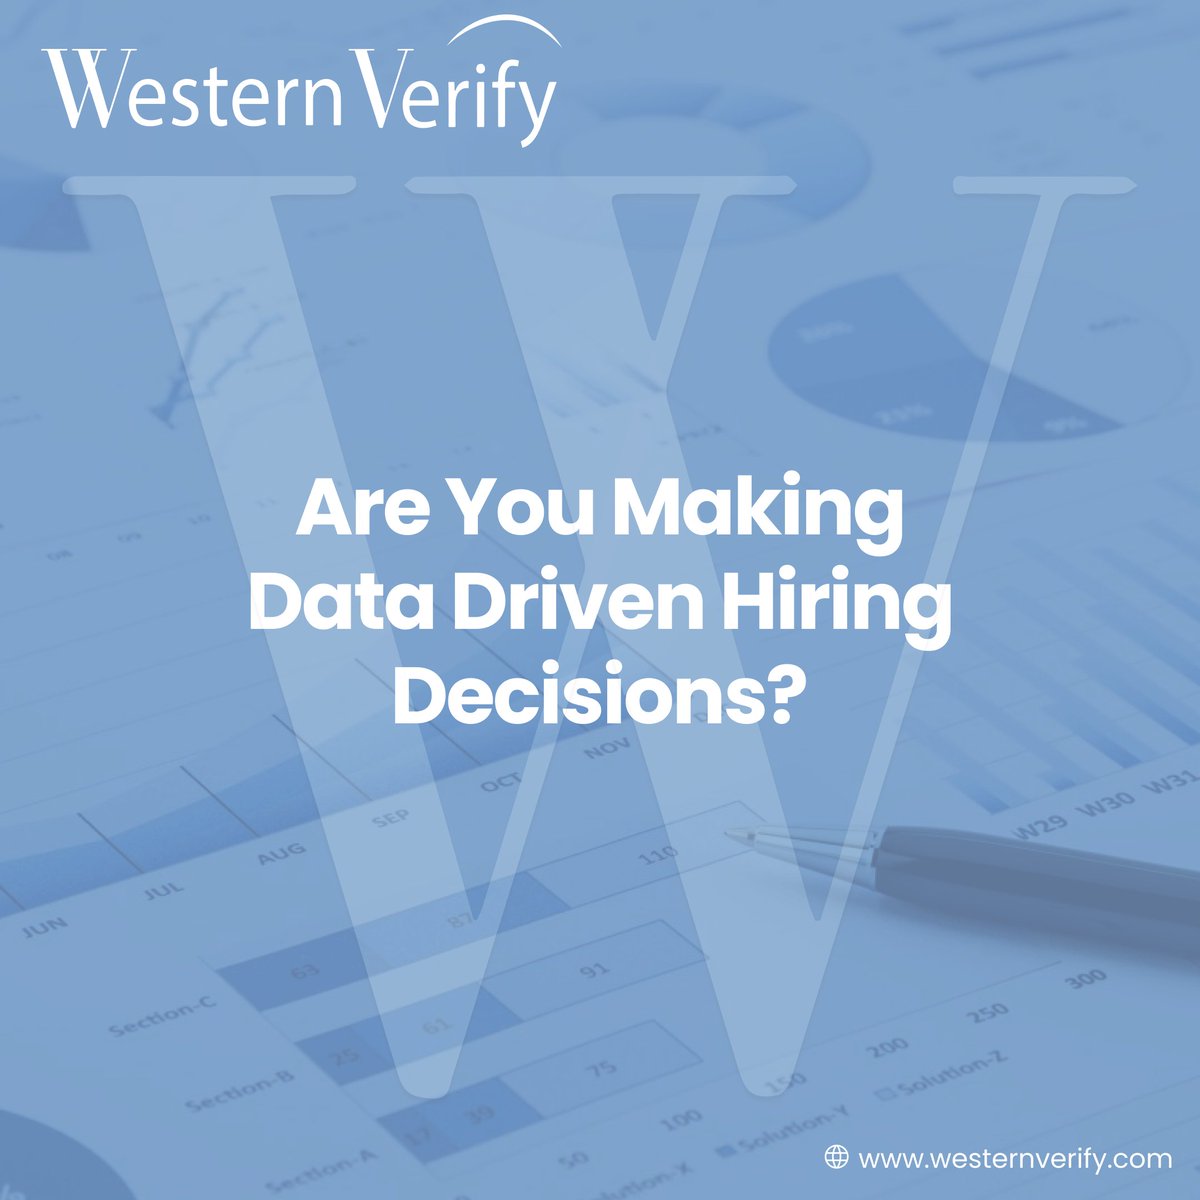 Unlock the potential of data-driven hiring decisions! Explore how background screening insights can empower your hiring process and mitigate risks. 

Read more: westernverify.com/the-power-of-d…

#BackgroundScreening #HiringDecisions #DataInsights #RiskMitigation #HRBestPractices